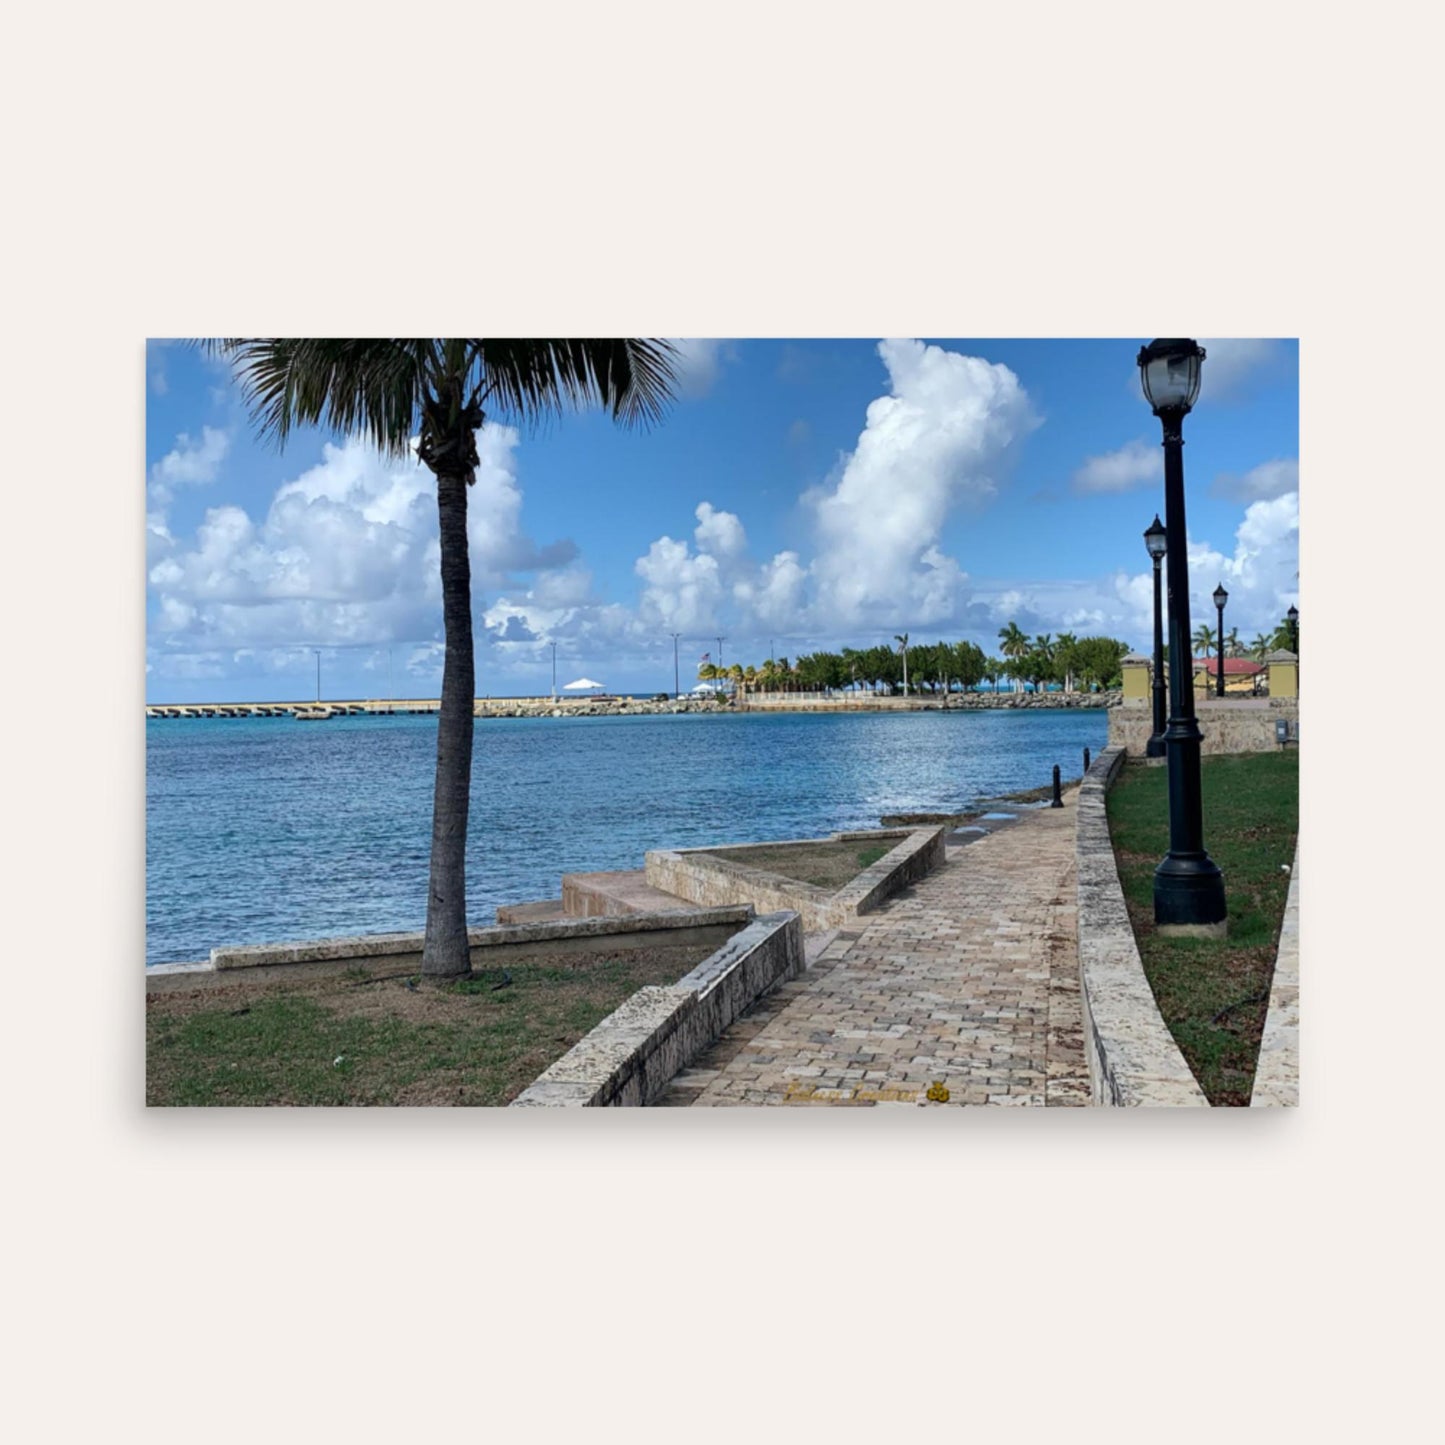 Island Life Photo Paper Poster